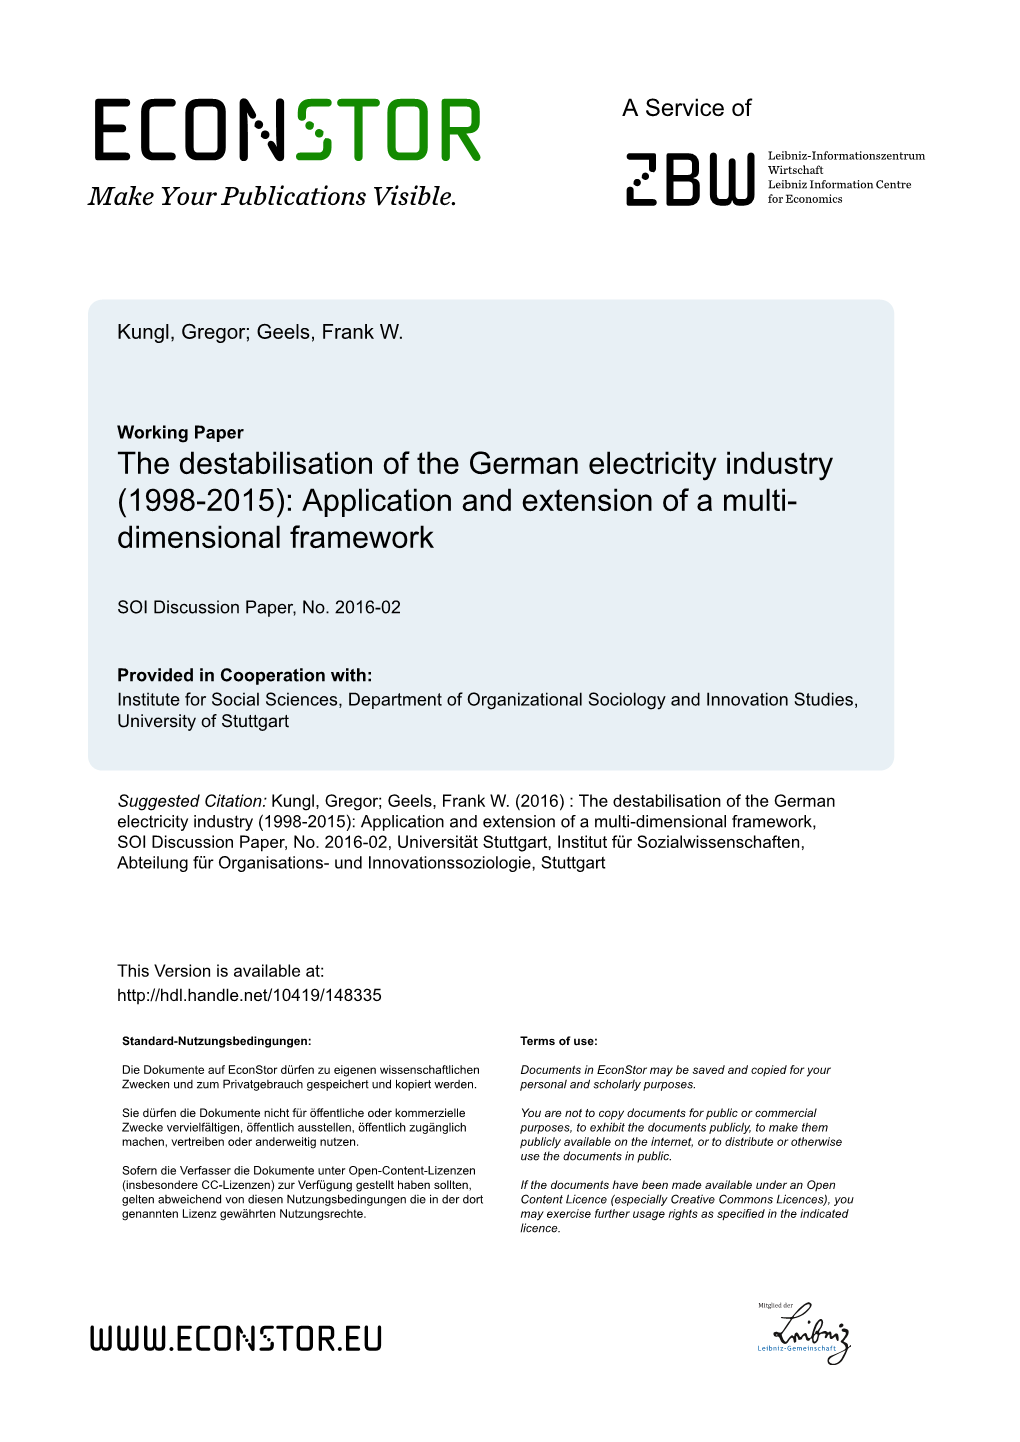 Destabilisation of the German Electricity Industry (1998-2015): Application and Extension of a Multi- Dimensional Framework